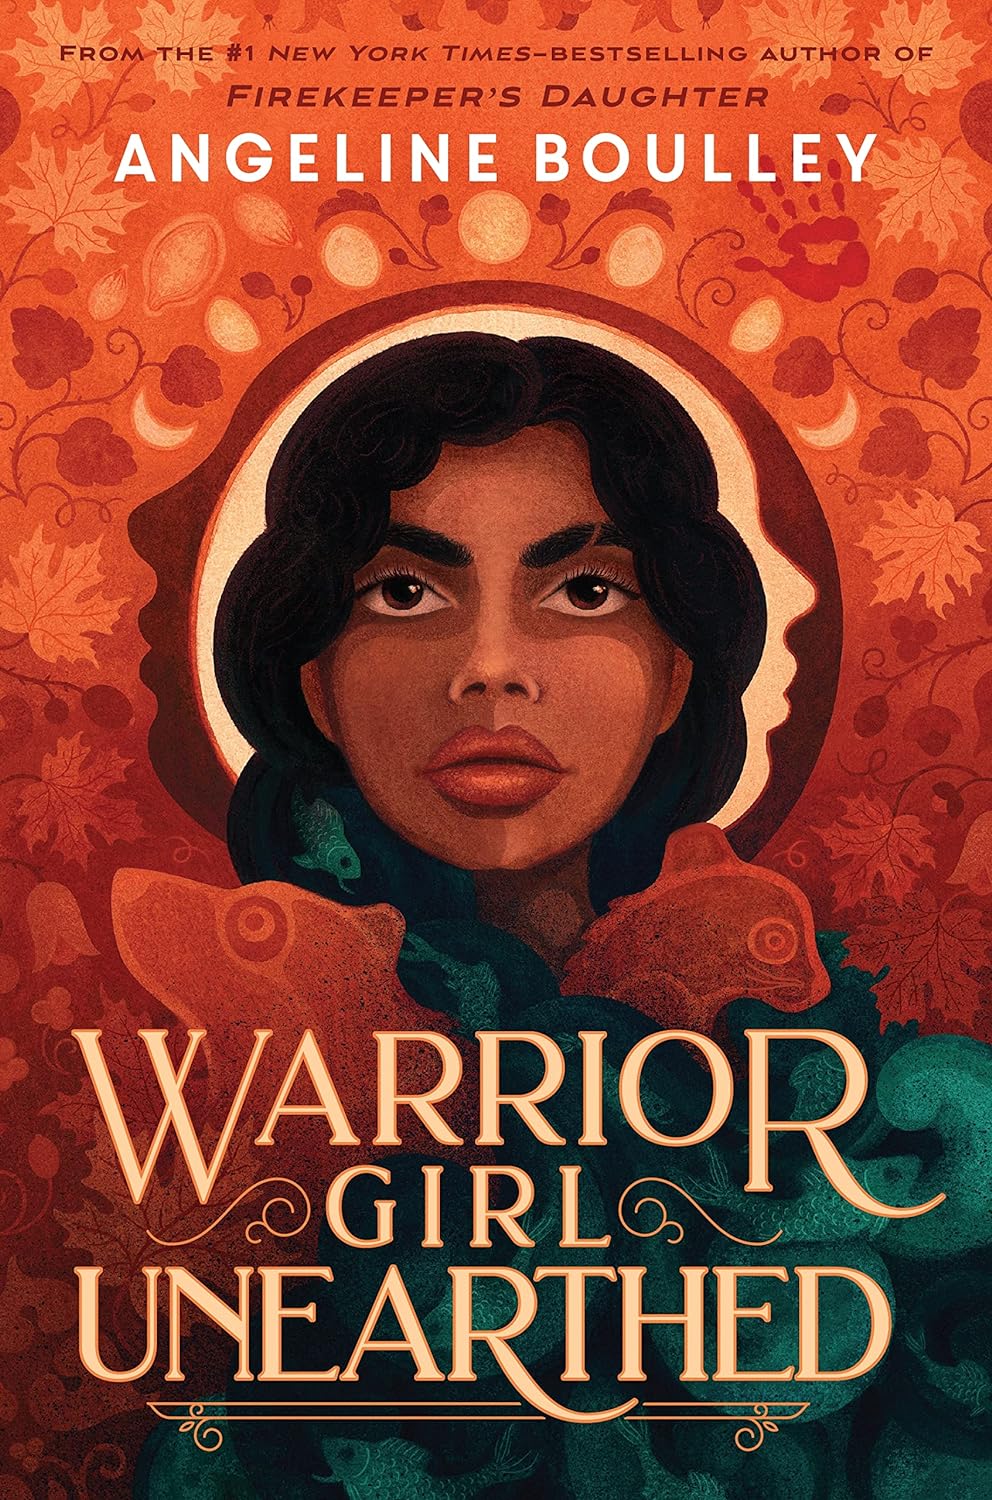 Book cover of Warrior Girl Unearthed